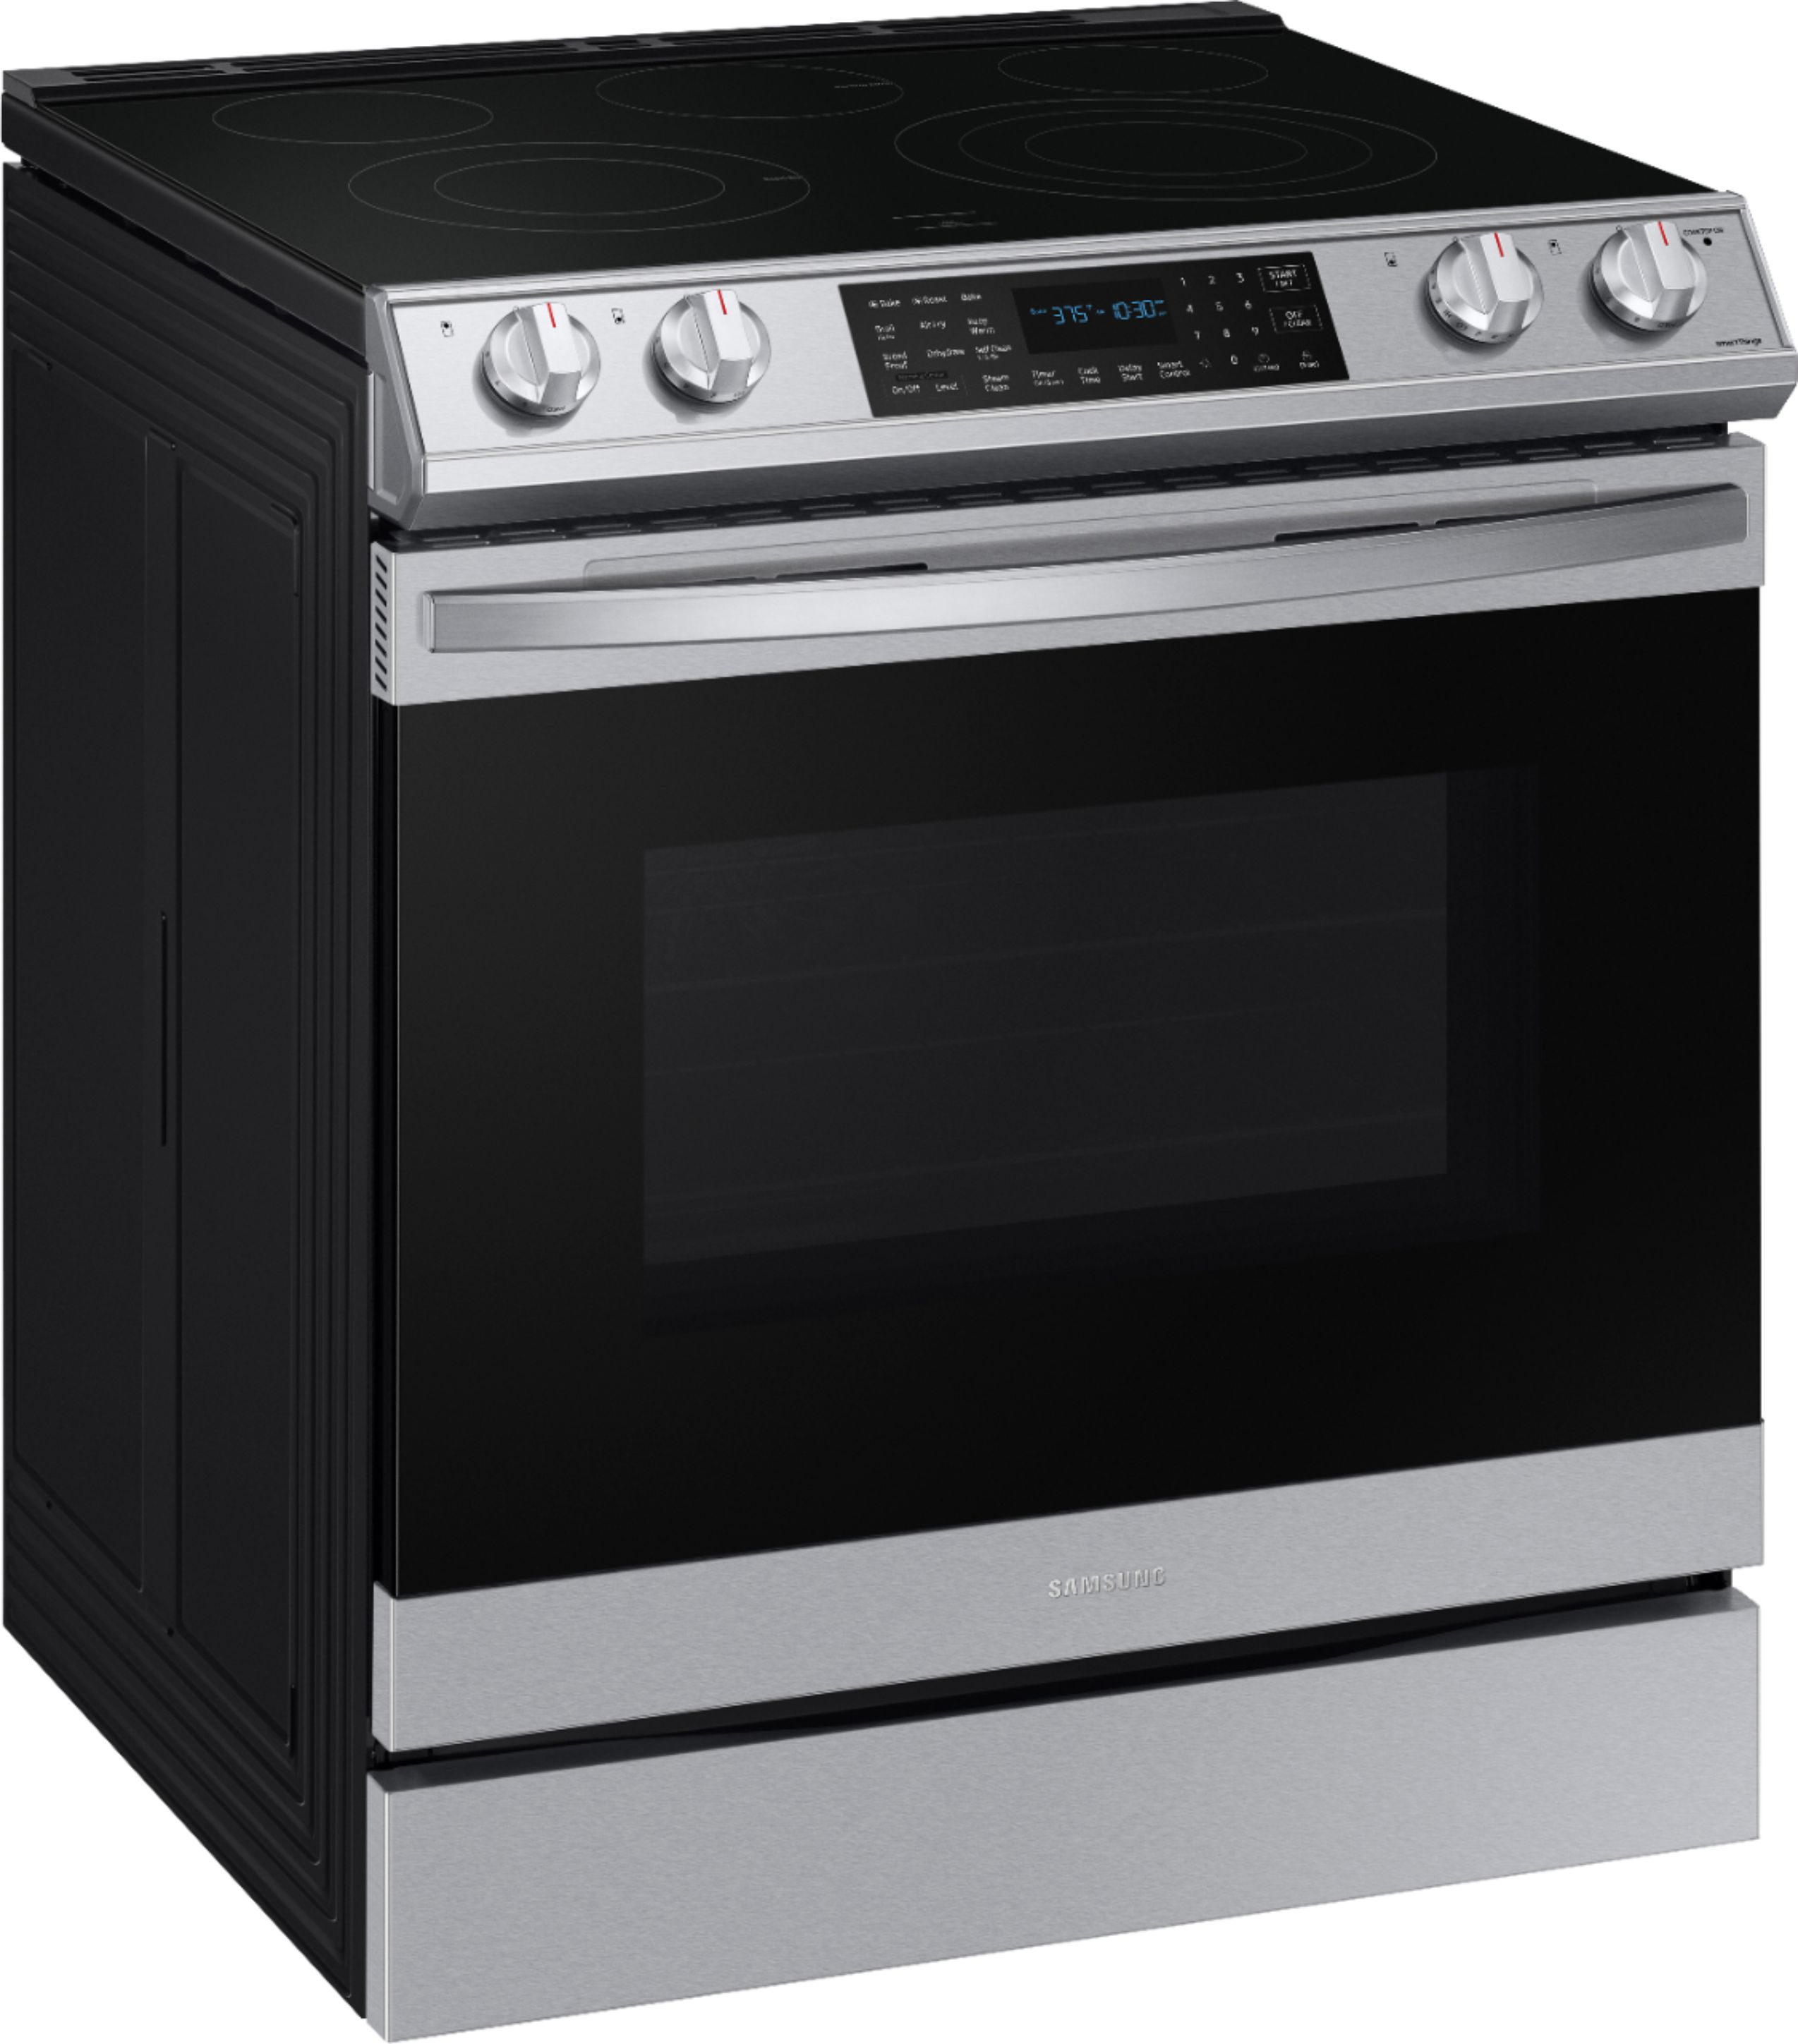 Angle View: Samsung - 6.3 cu. ft. Freestanding Electric Range with WiFi and Steam Clean - Black